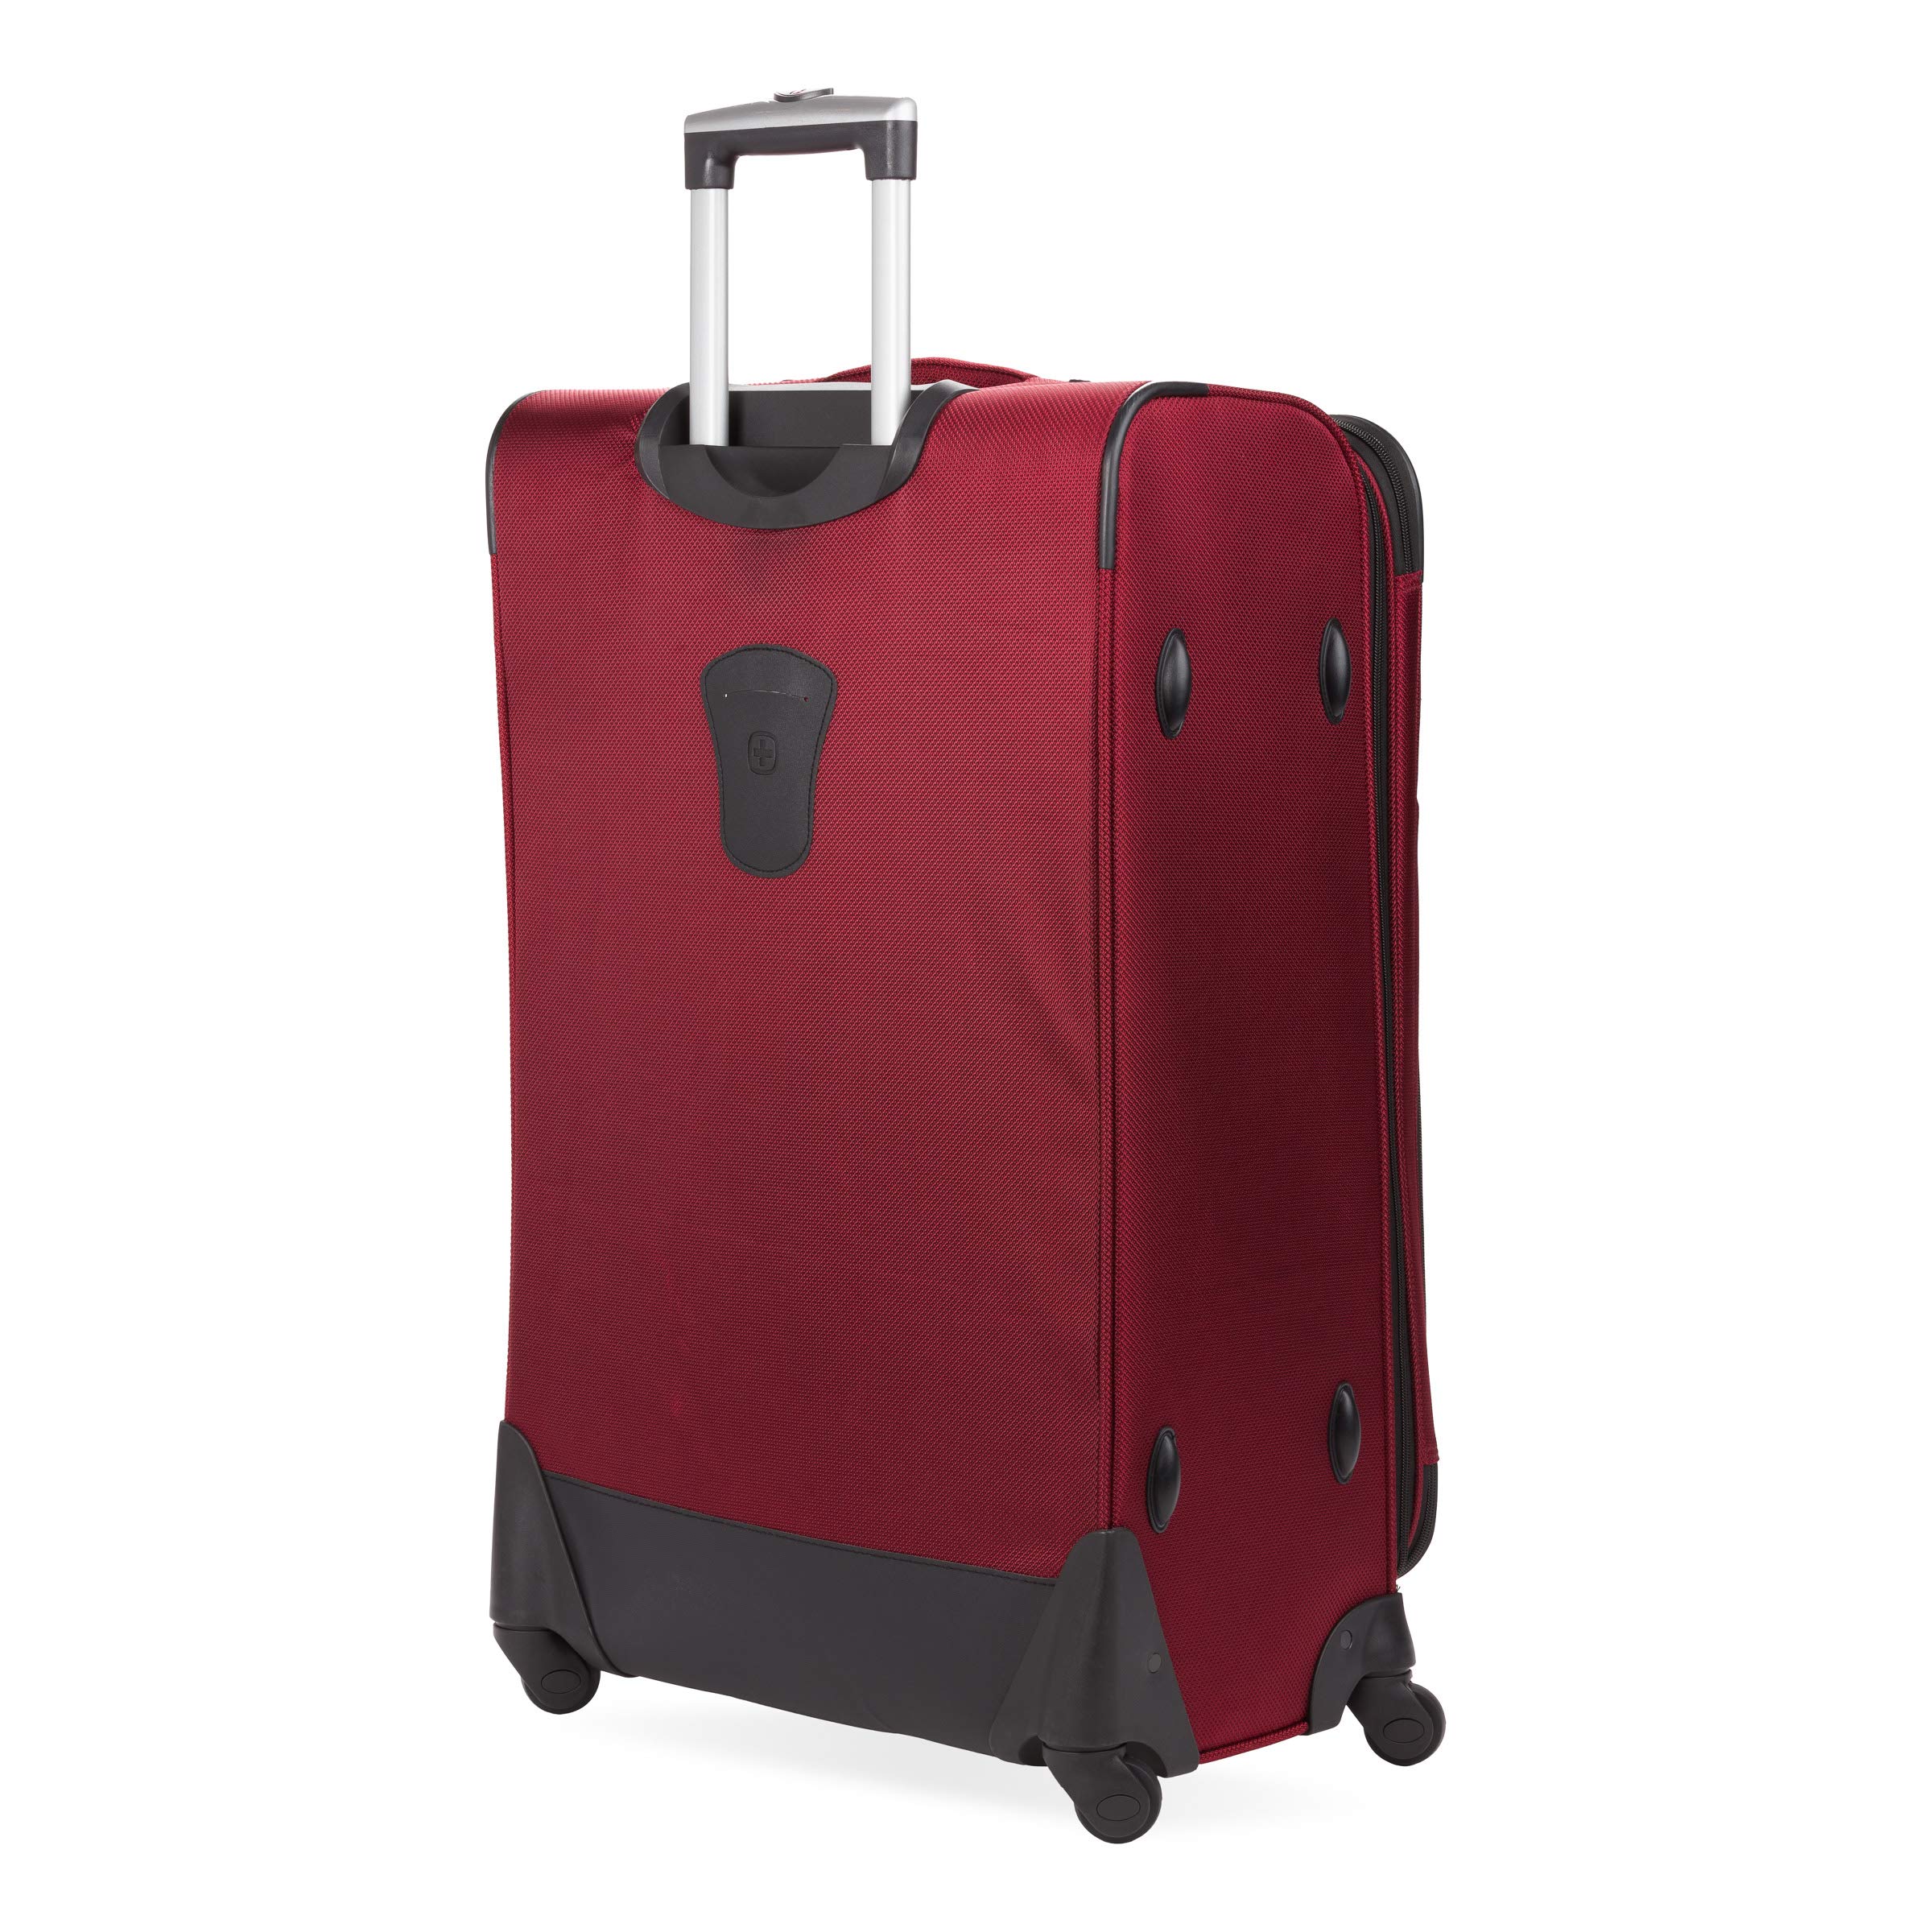 SwissGear Sion Softside Expandable Roller Luggage, Burgandy, Checked-Large 29-Inch